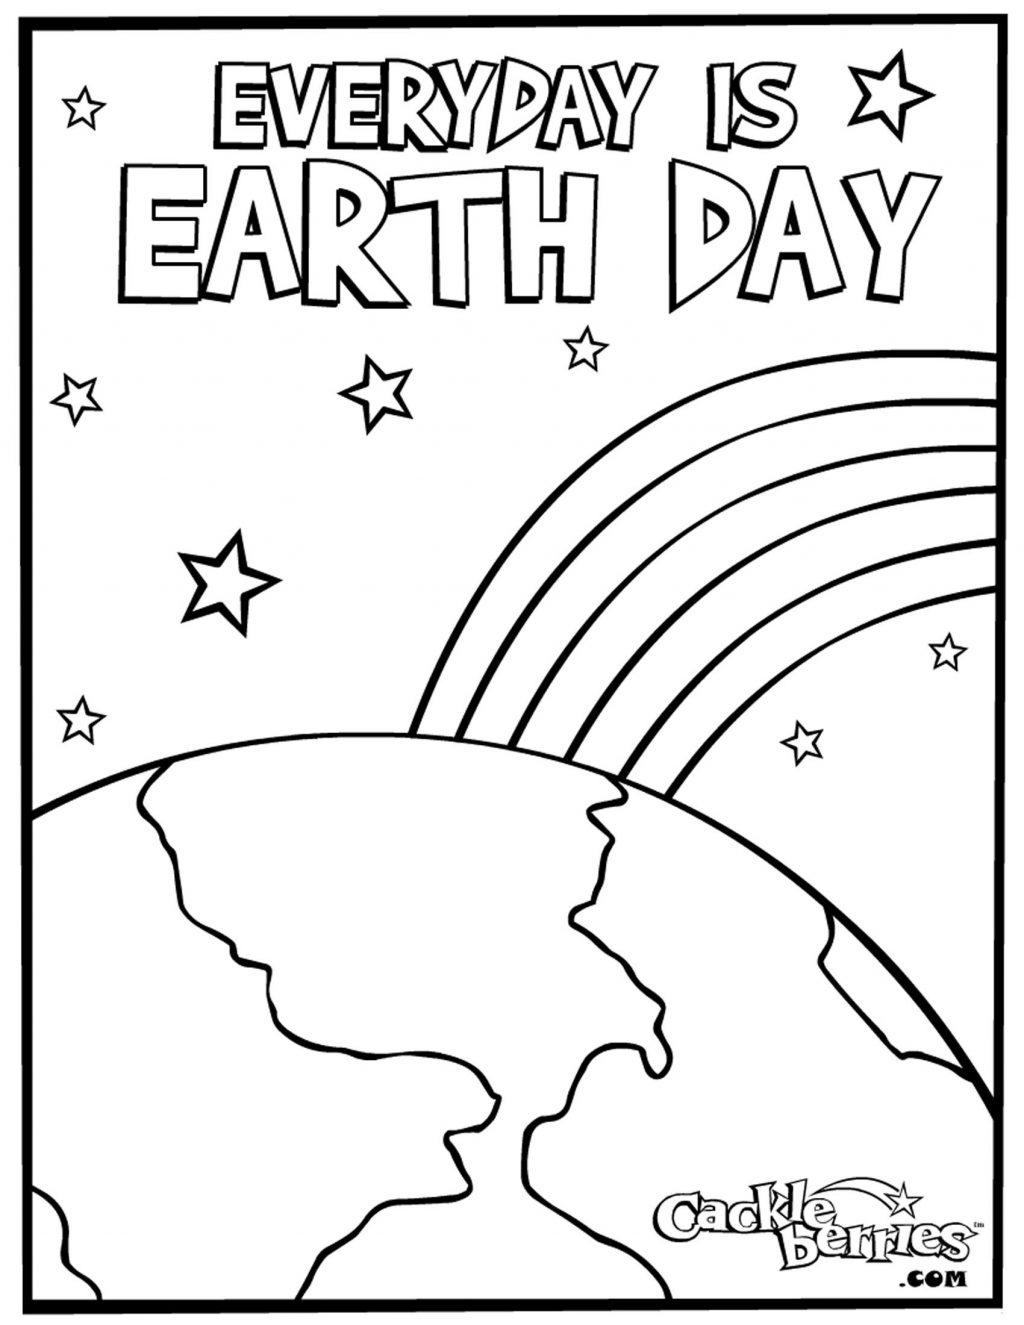 Coloring Pages ~ Coloring Pages Earth Day Printable With Trees - Free Printable Earth Pictures